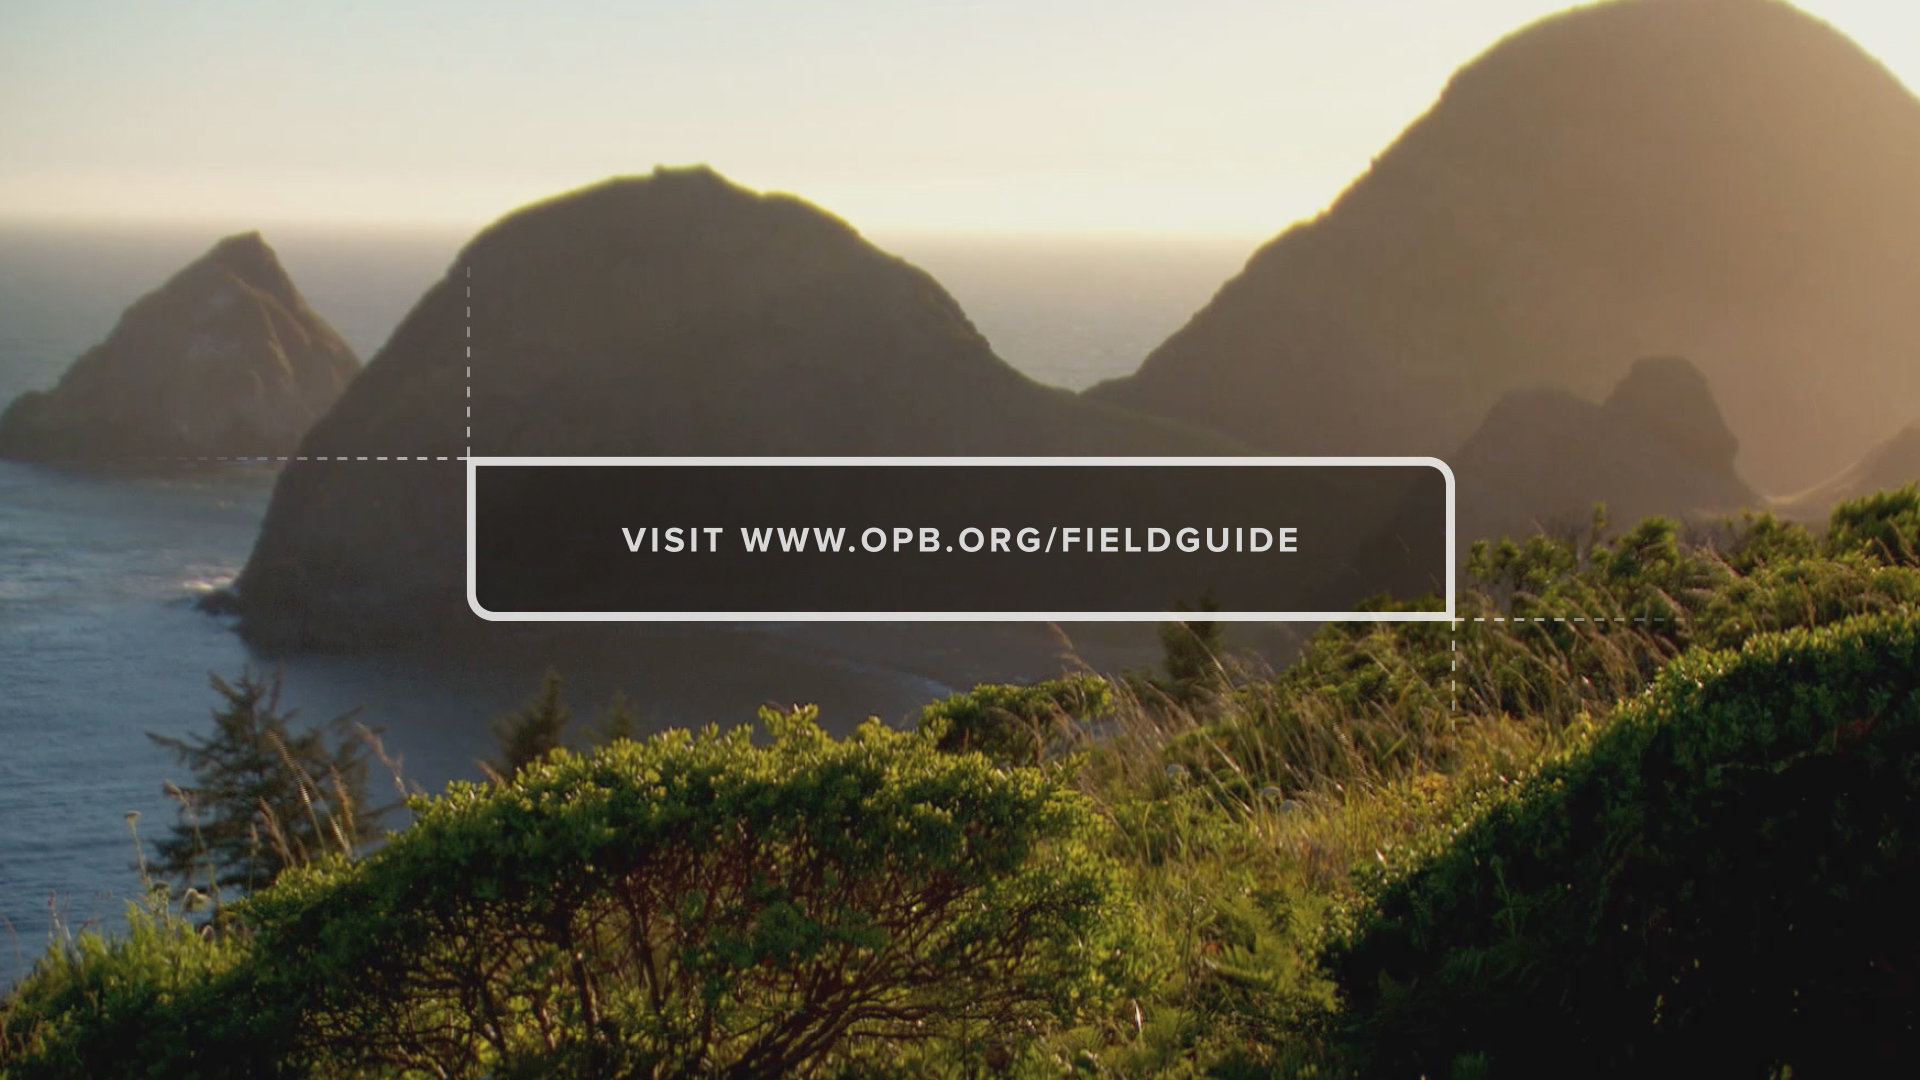 Screen graphics showing Oregon Field Guide URL overlaid on footage of coastline